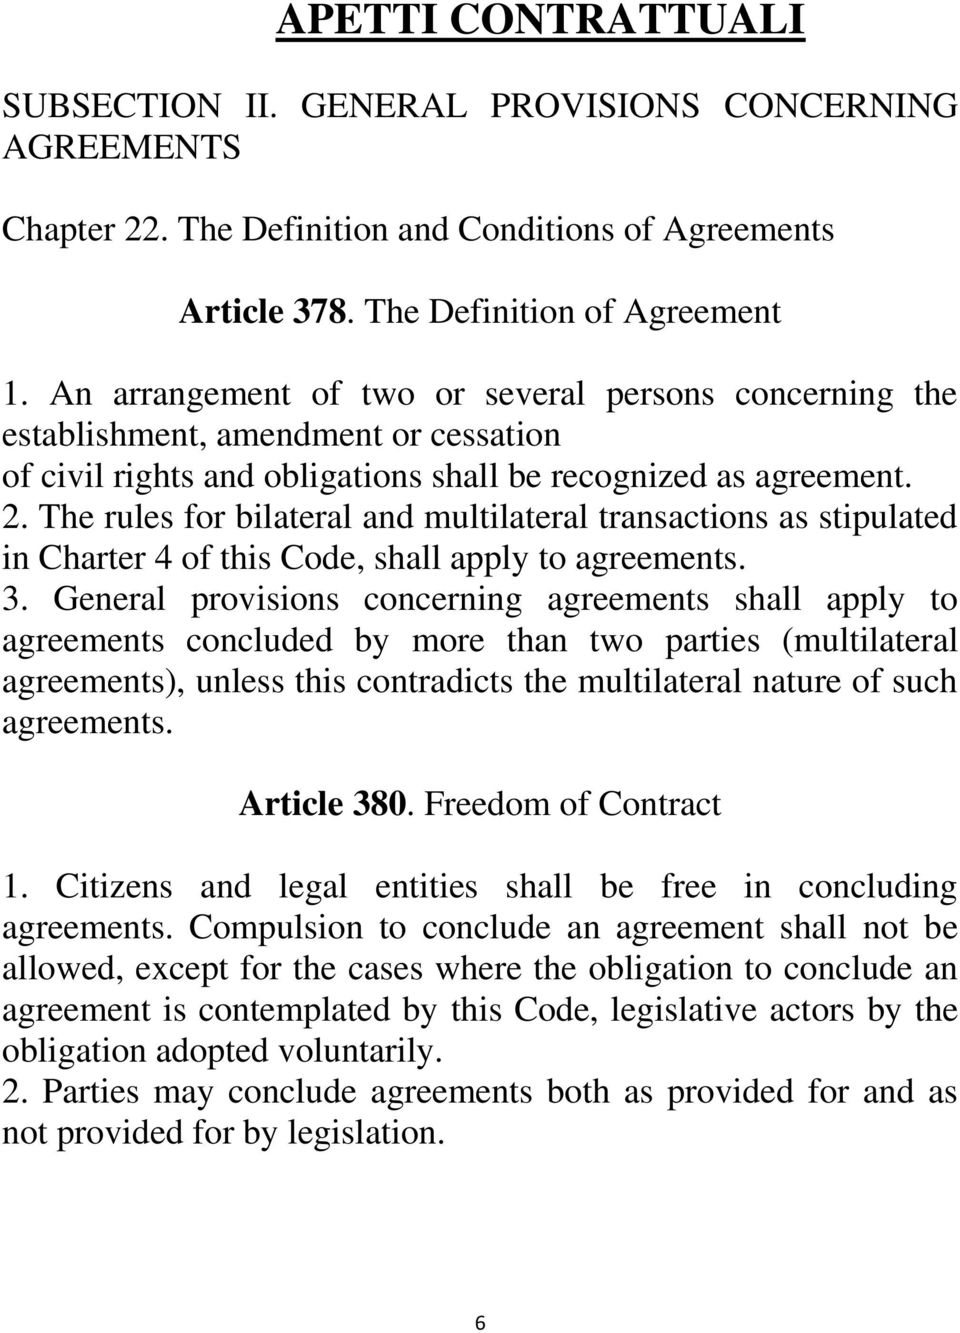 The rules for bilateral and multilateral transactions as stipulated in Charter 4 of this Code, shall apply to agreements. 3.